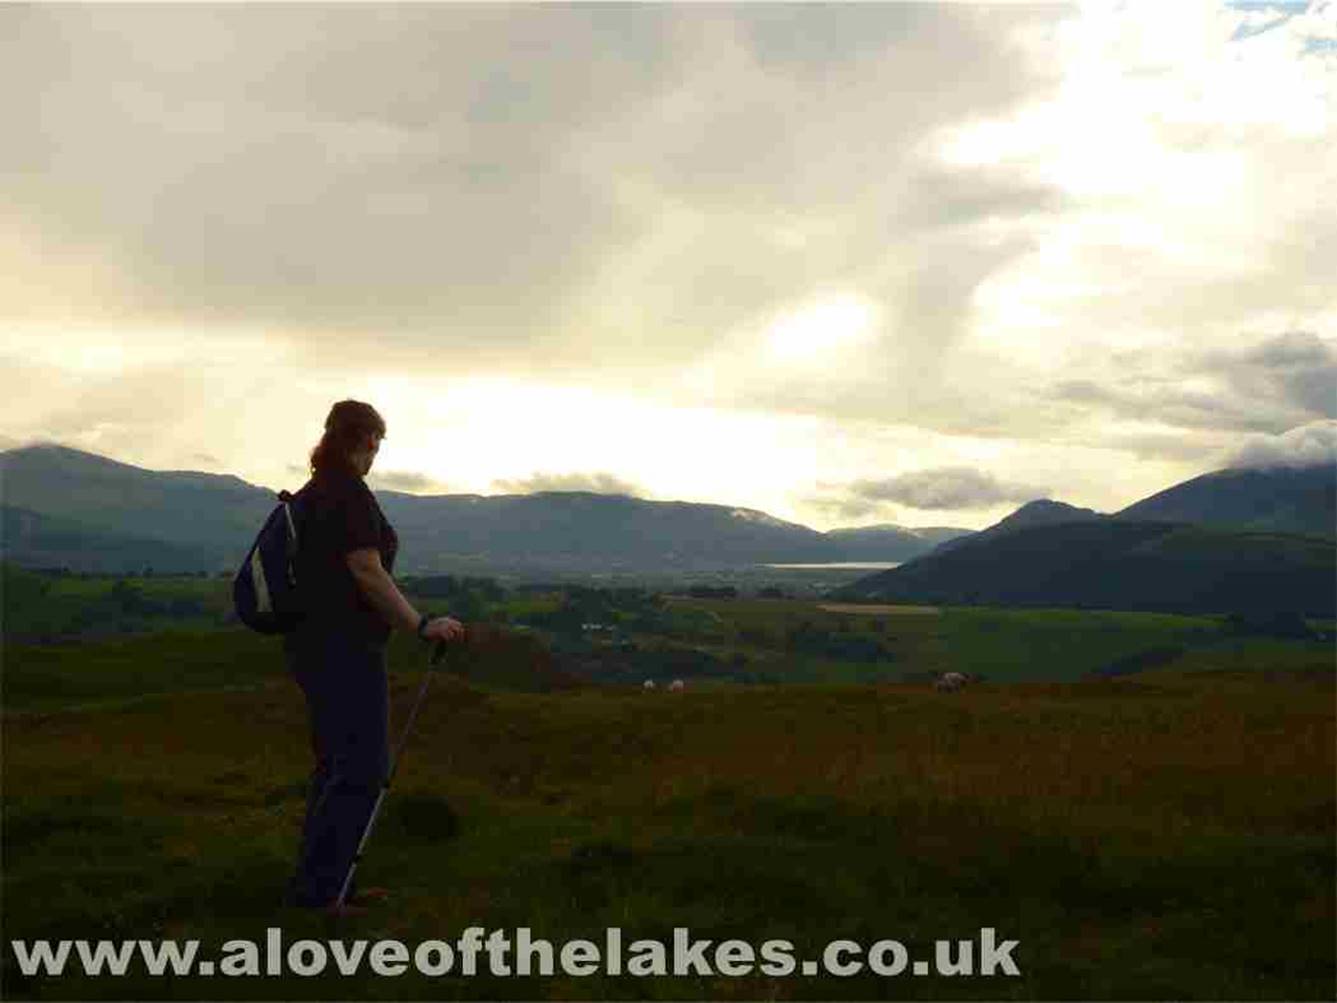 Sue takes a breather to look out towards Bassenthwaite Lake